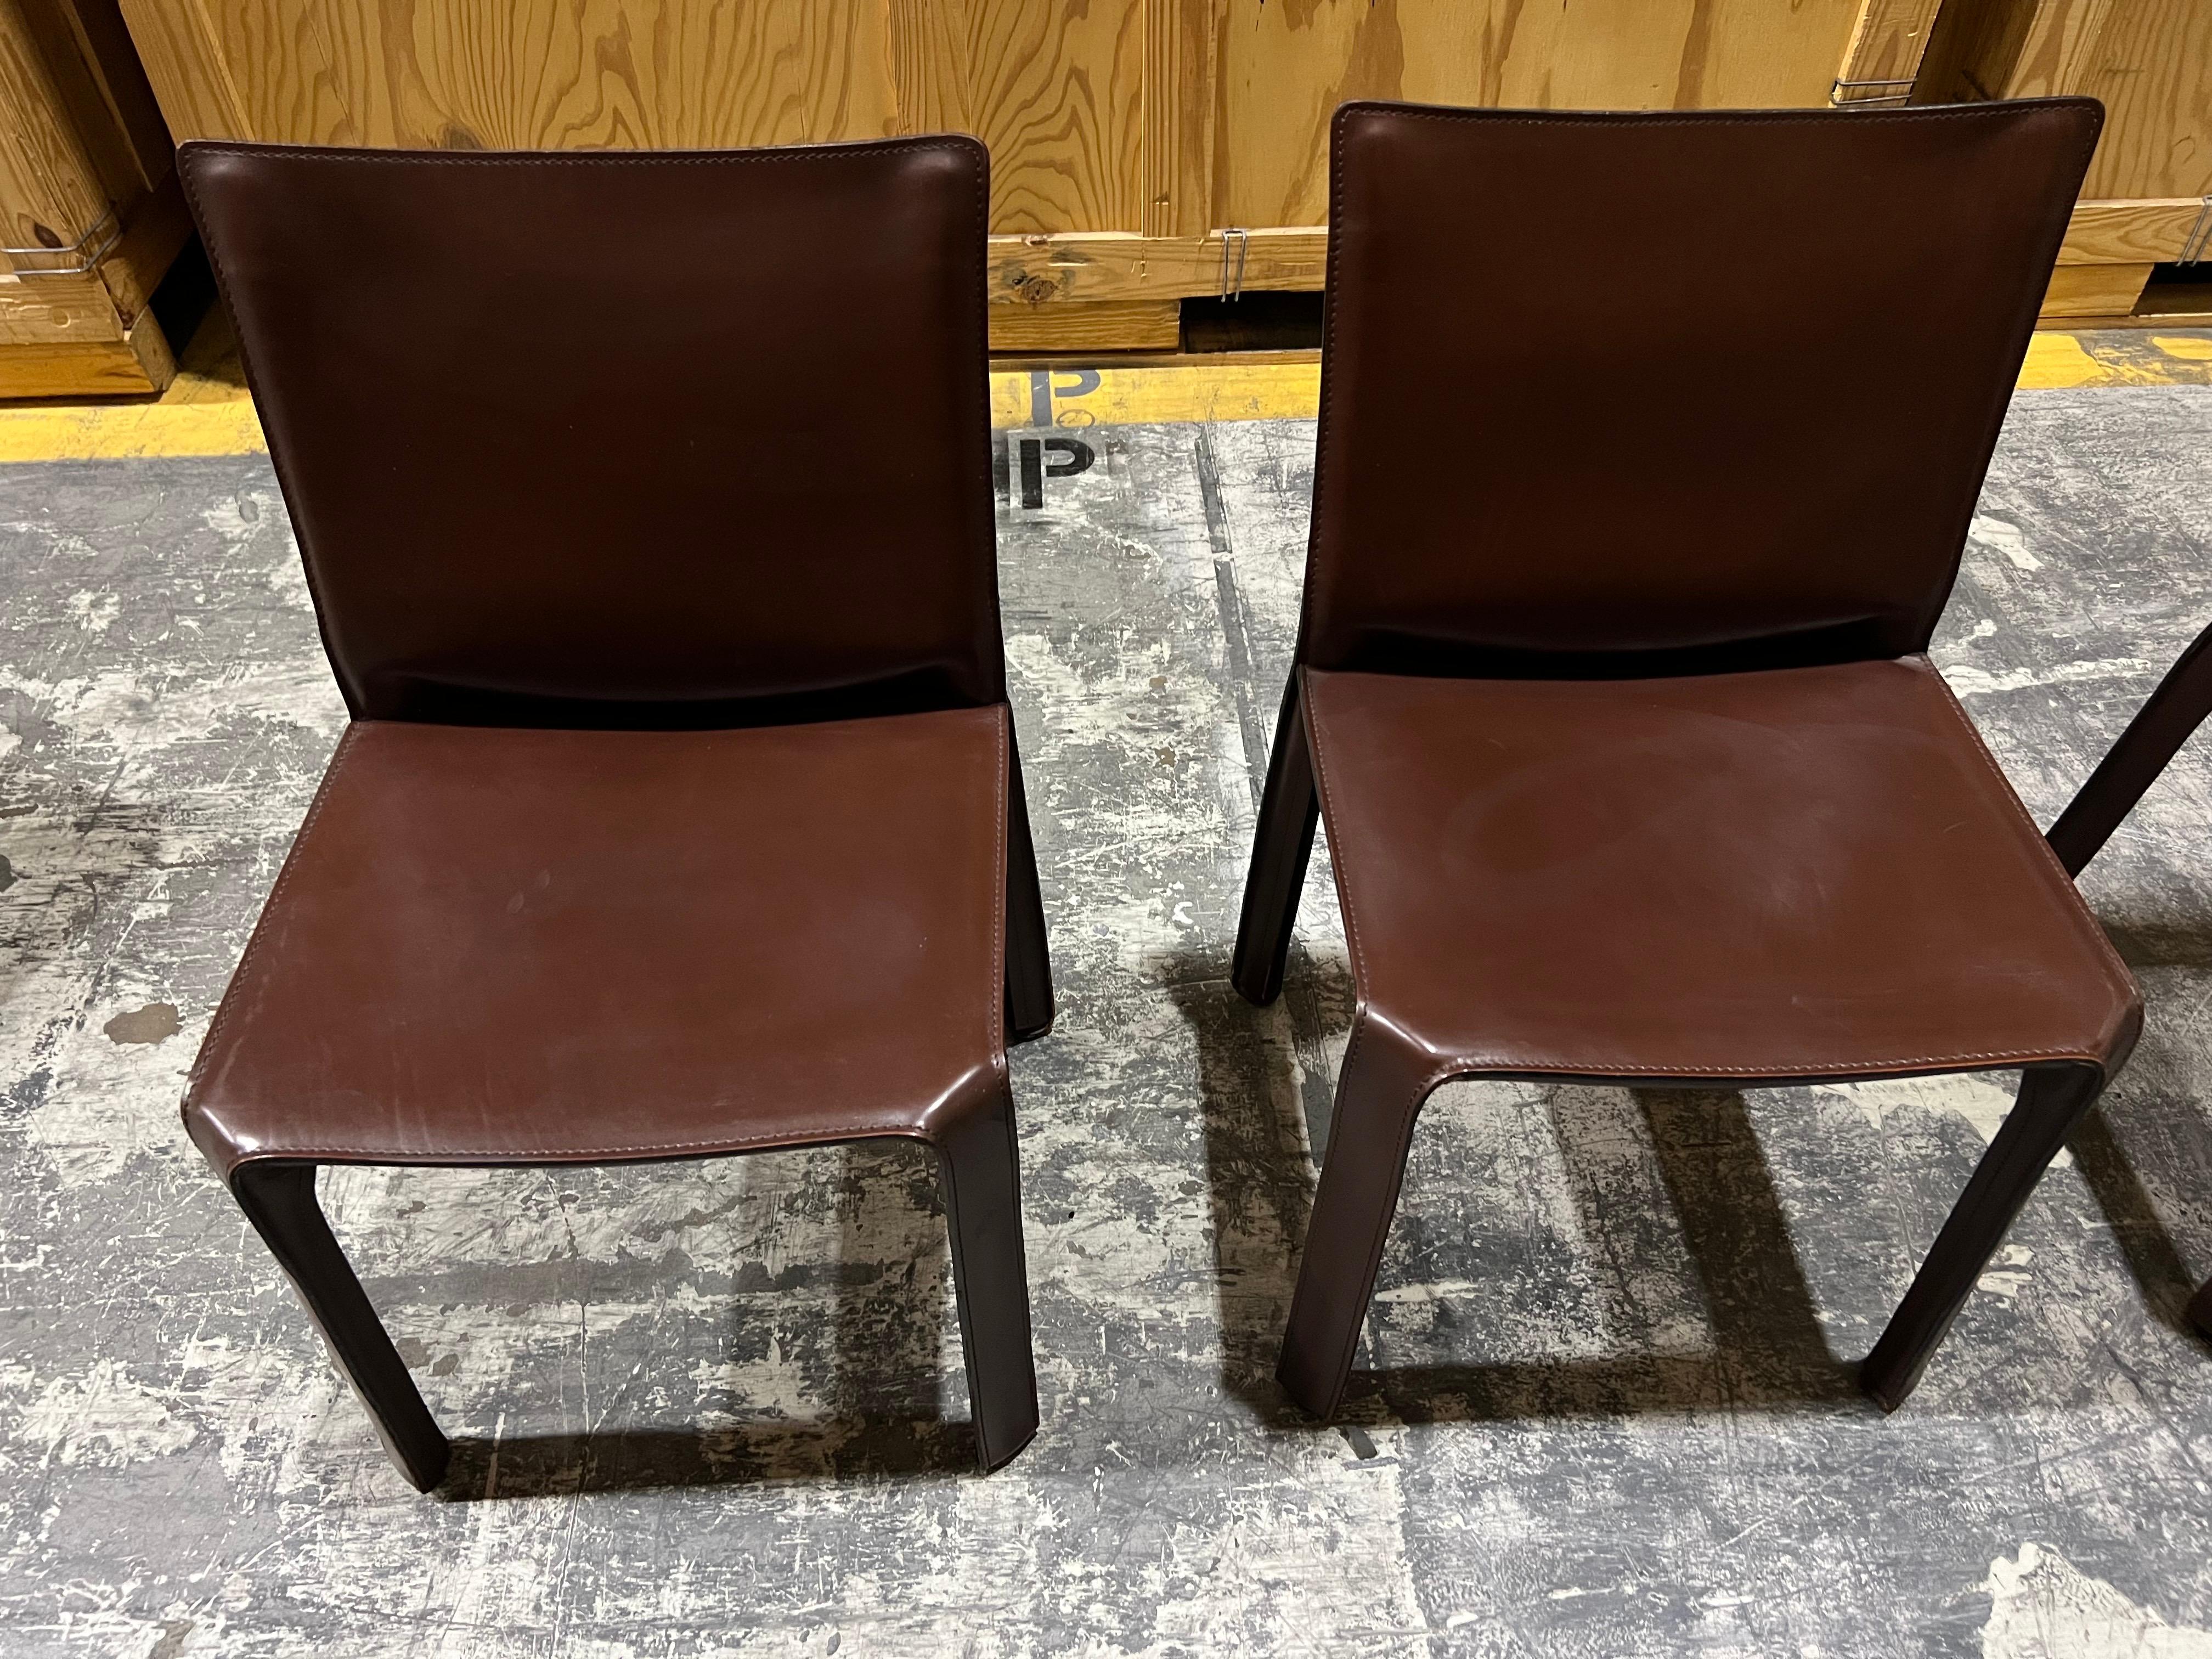 Beautiful set of four Cab Chairs in leather hide, designed by Mario Bellini in 1976.
Manufactured by Cassina in circa 1990s. The set consists of four cab 412 dining chairs covered in a dark brown mahogany color leather. 